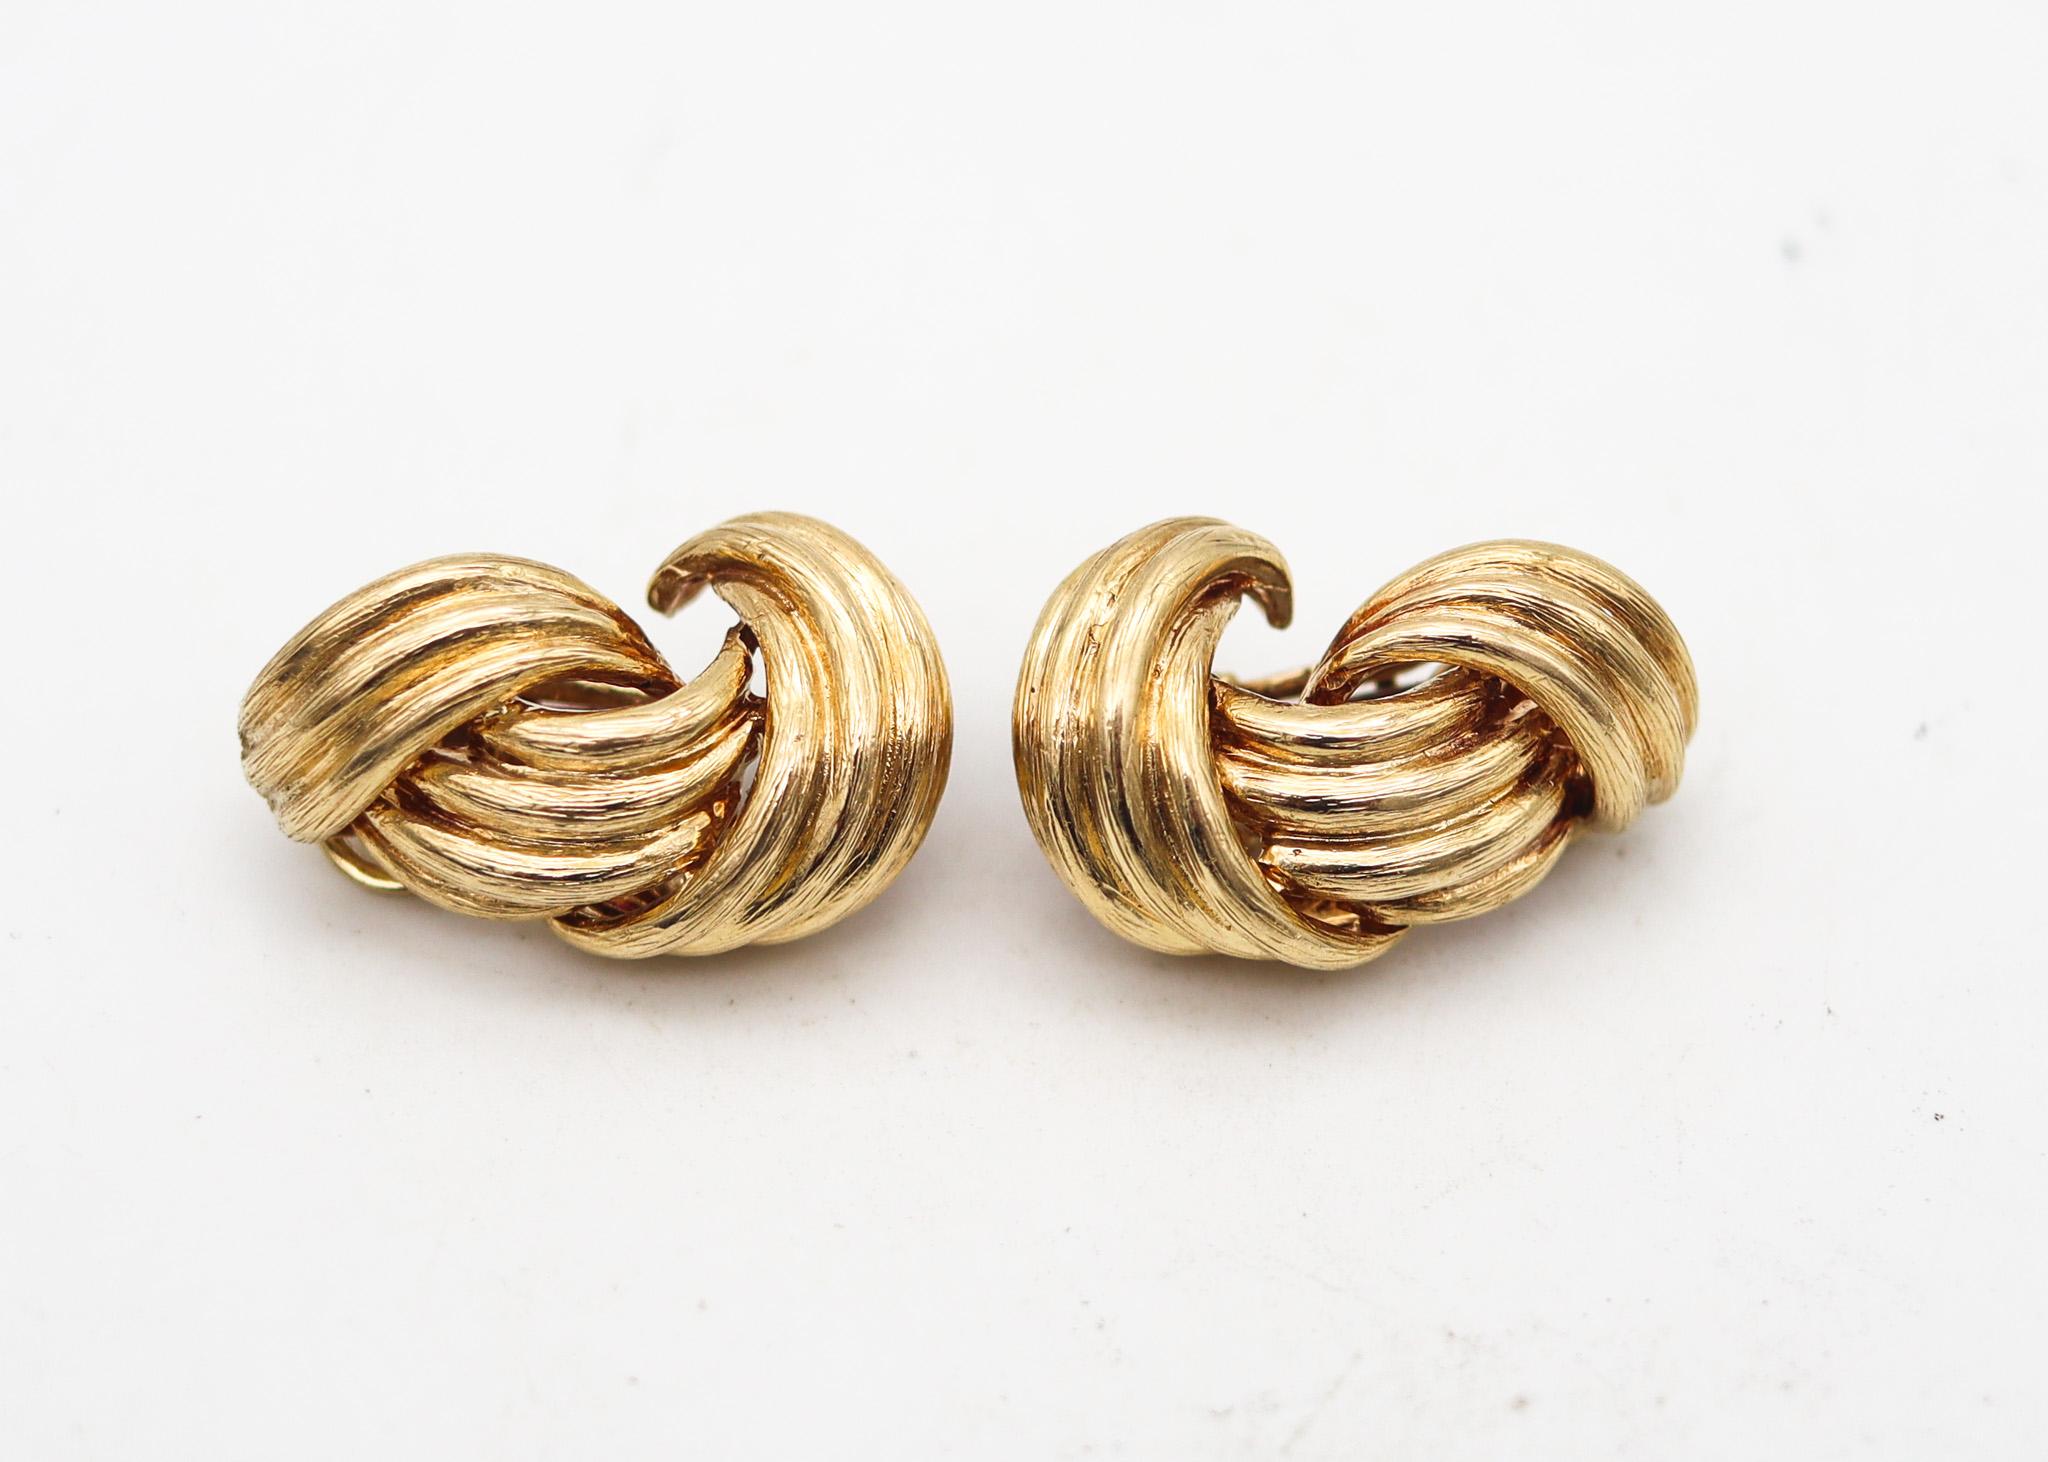 Pair of clips-on earrings designed by David Webb (1925-1975).

A vintage pair of clips-on earrings, created in New York city at the jewelry atelier of David Webb, back in the 1970's. These pair of earrings were designed as left and right pairs and